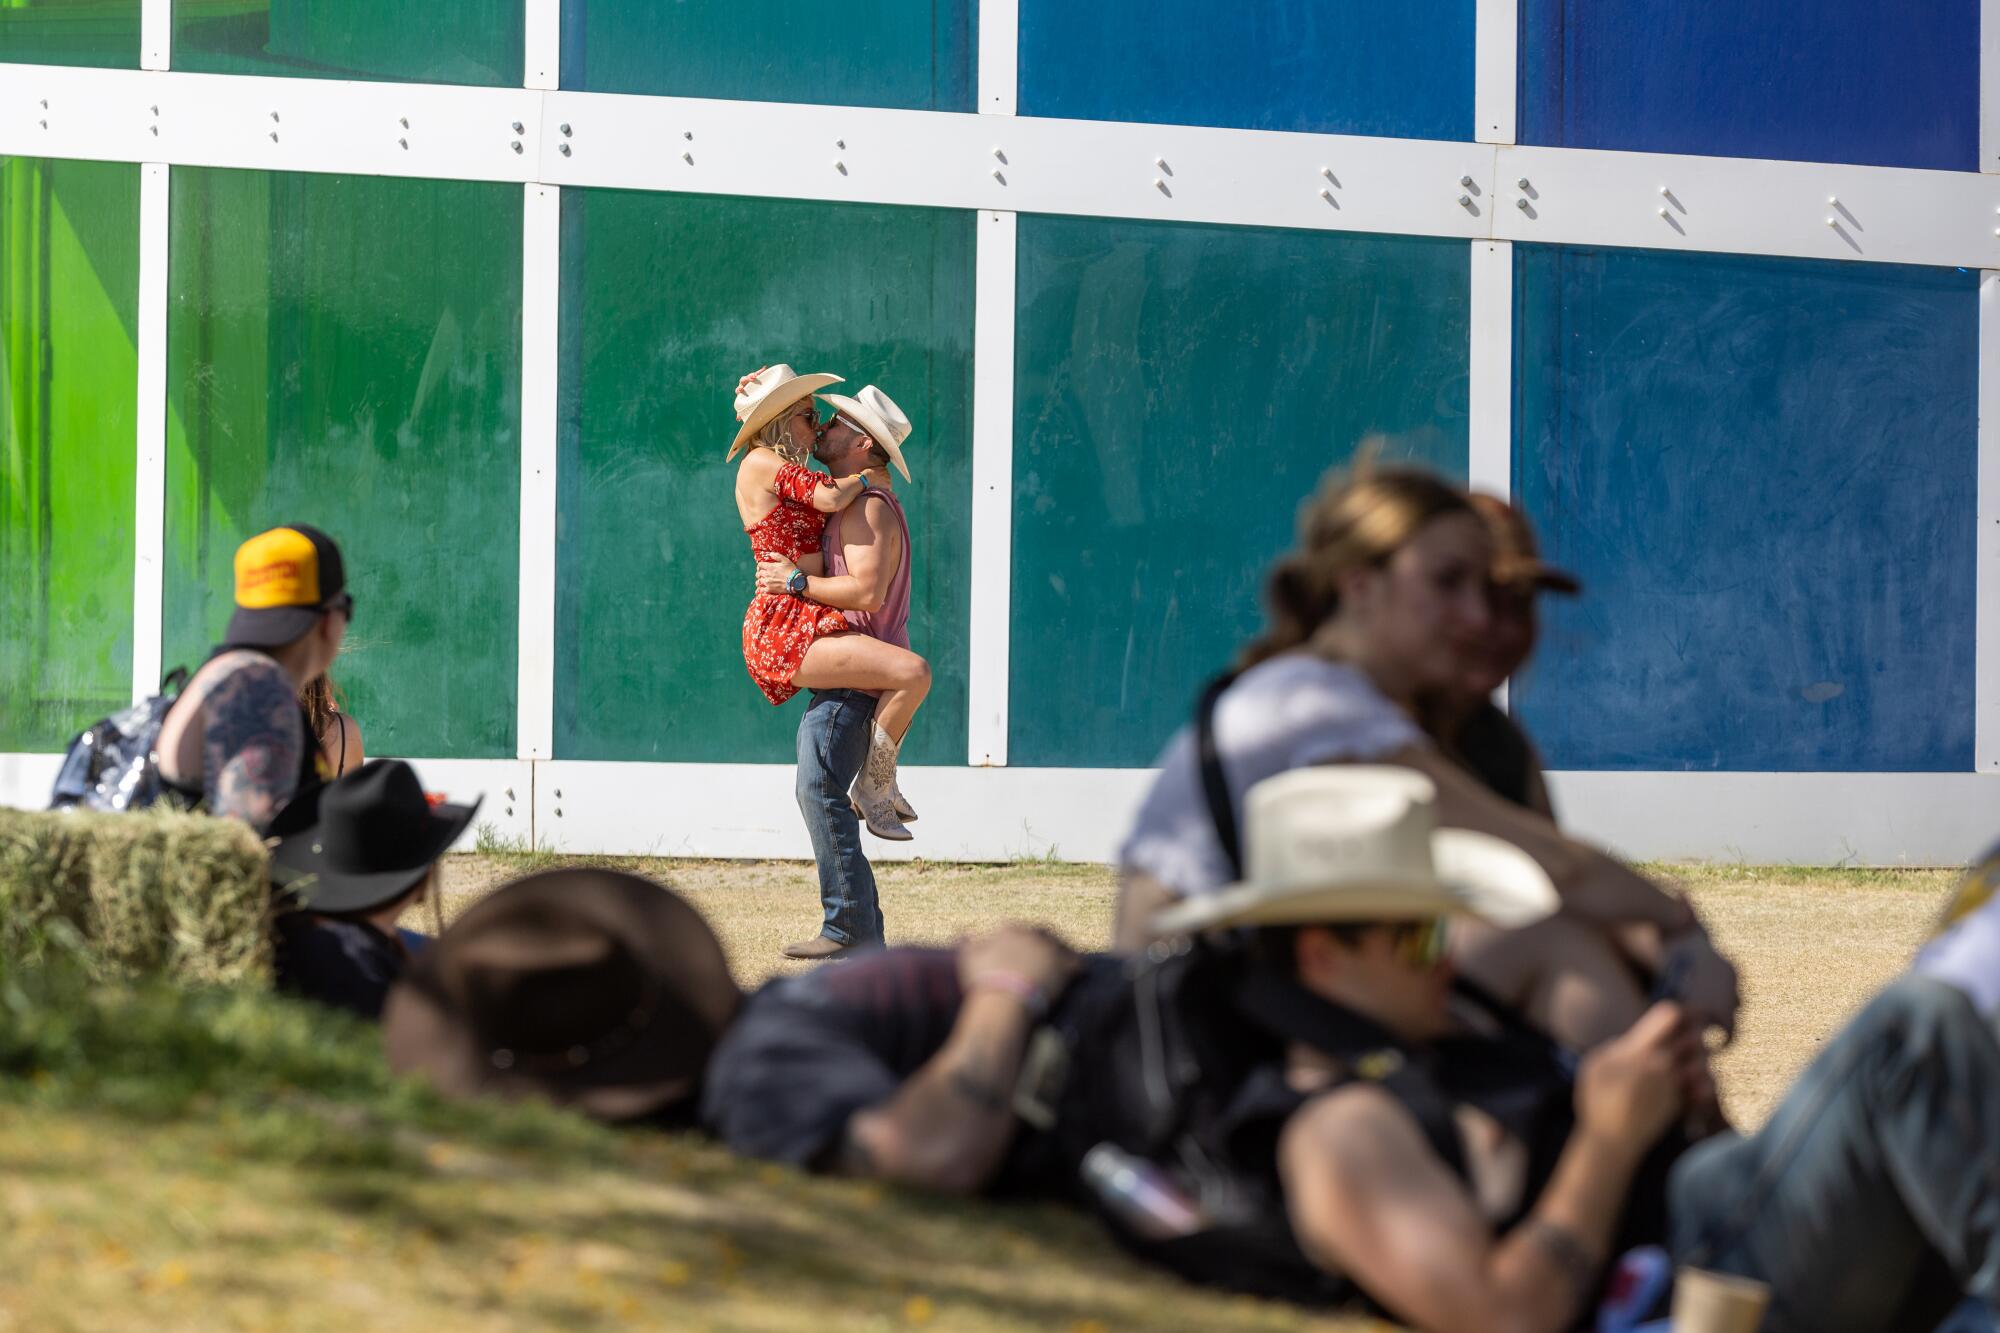 A couple kisses as other nap and rest in the shade at the Stagecoach Country Music Festival.